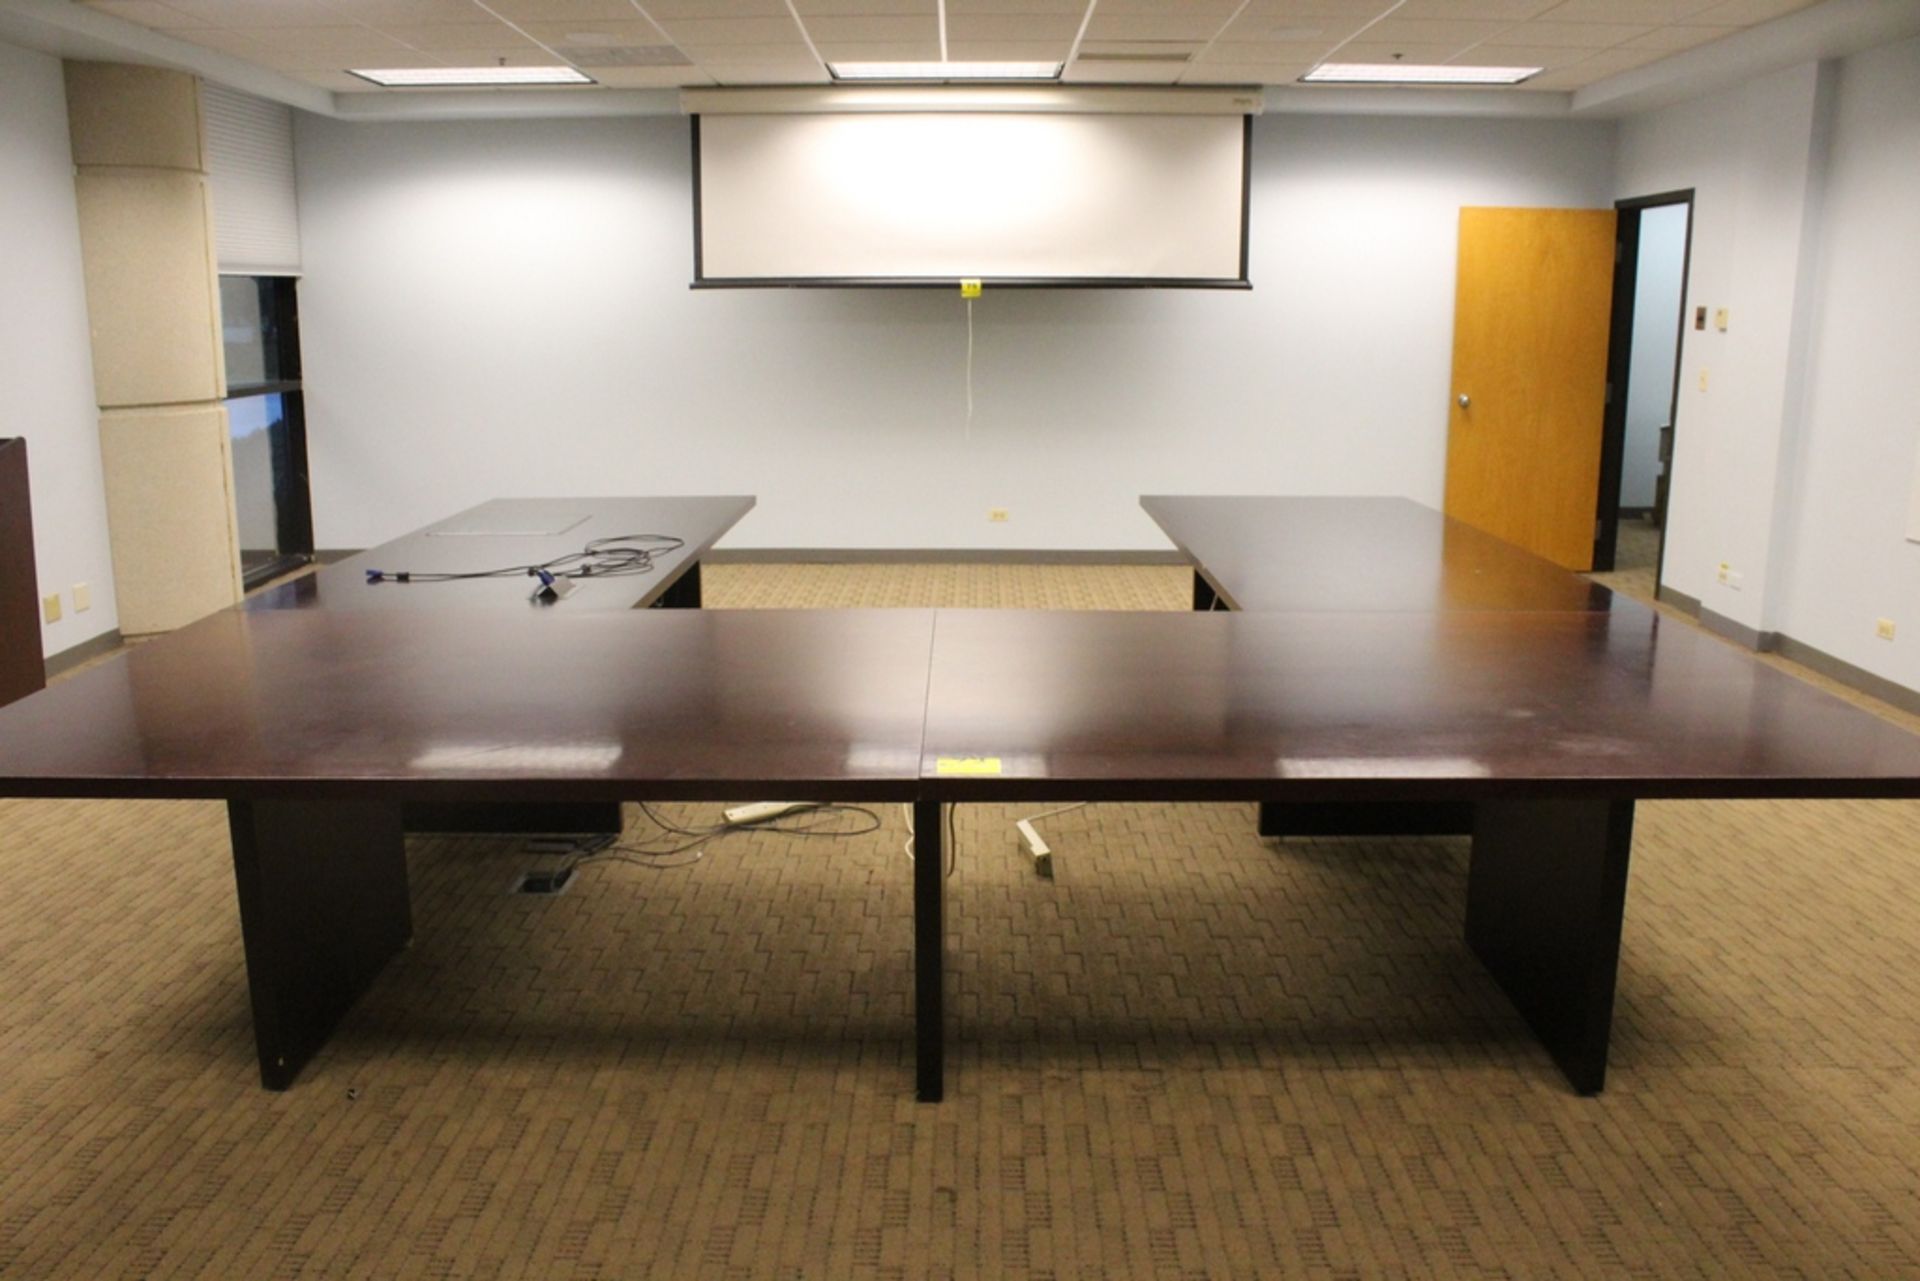 U-SHAPED WOOD CONFERENCE TABLE, 144" X 150"